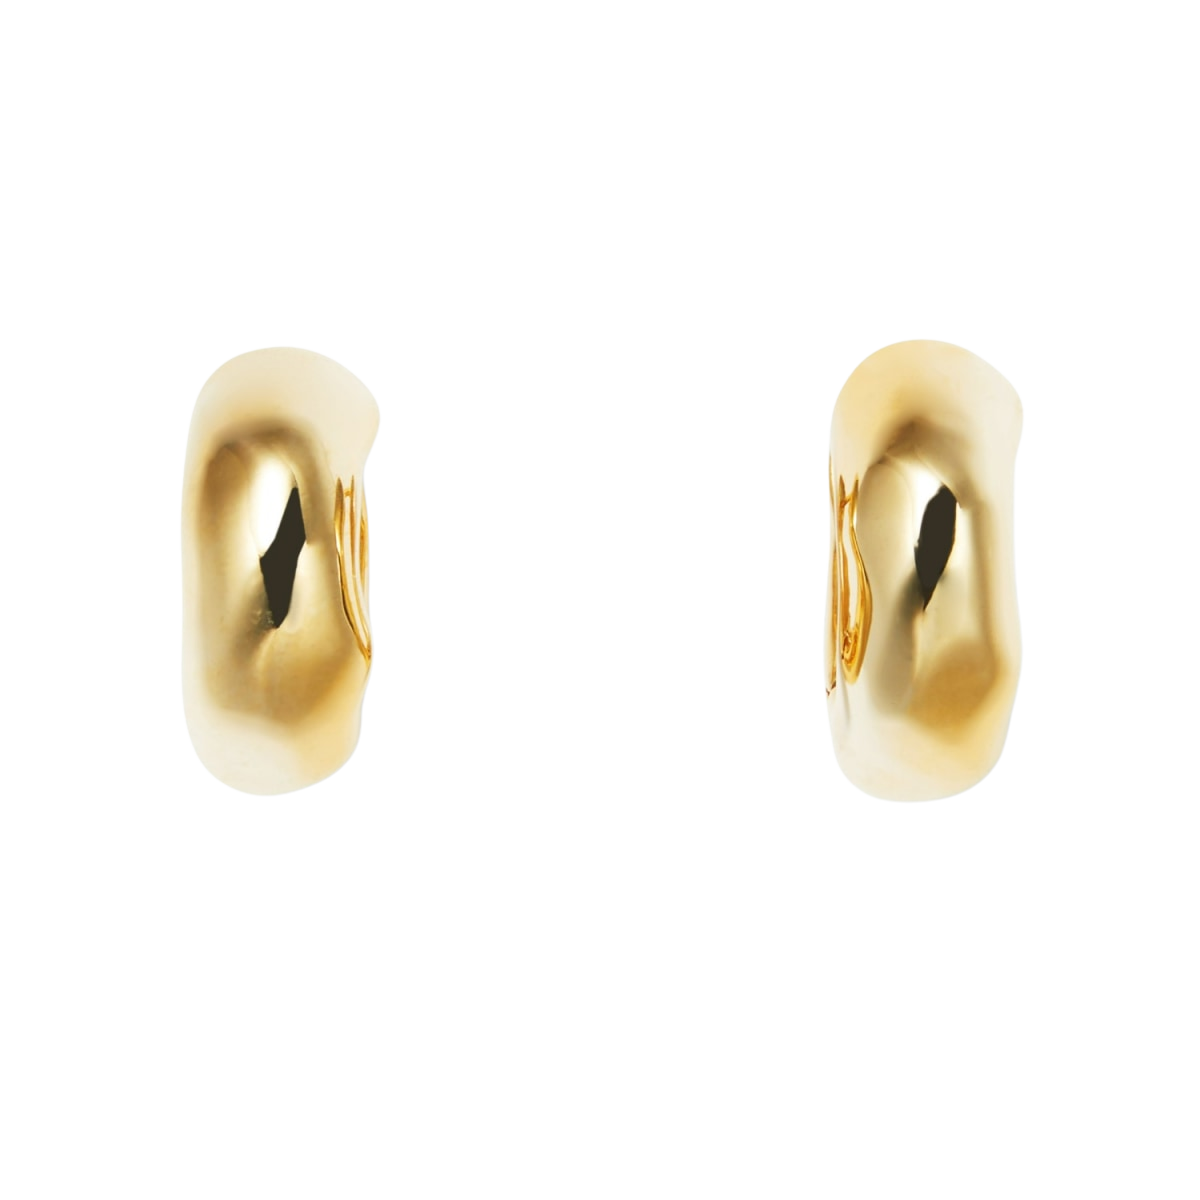 https://storage.googleapis.com/download/storage/v1/b/whering.appspot.com/o/marketplace_product_images%2Fundefined-jewelry-faceted-hoop-earrings-gold-yellow-kUxyomRjWXLXFcHoA8YL83.png?generation=1677690353561998&alt=media